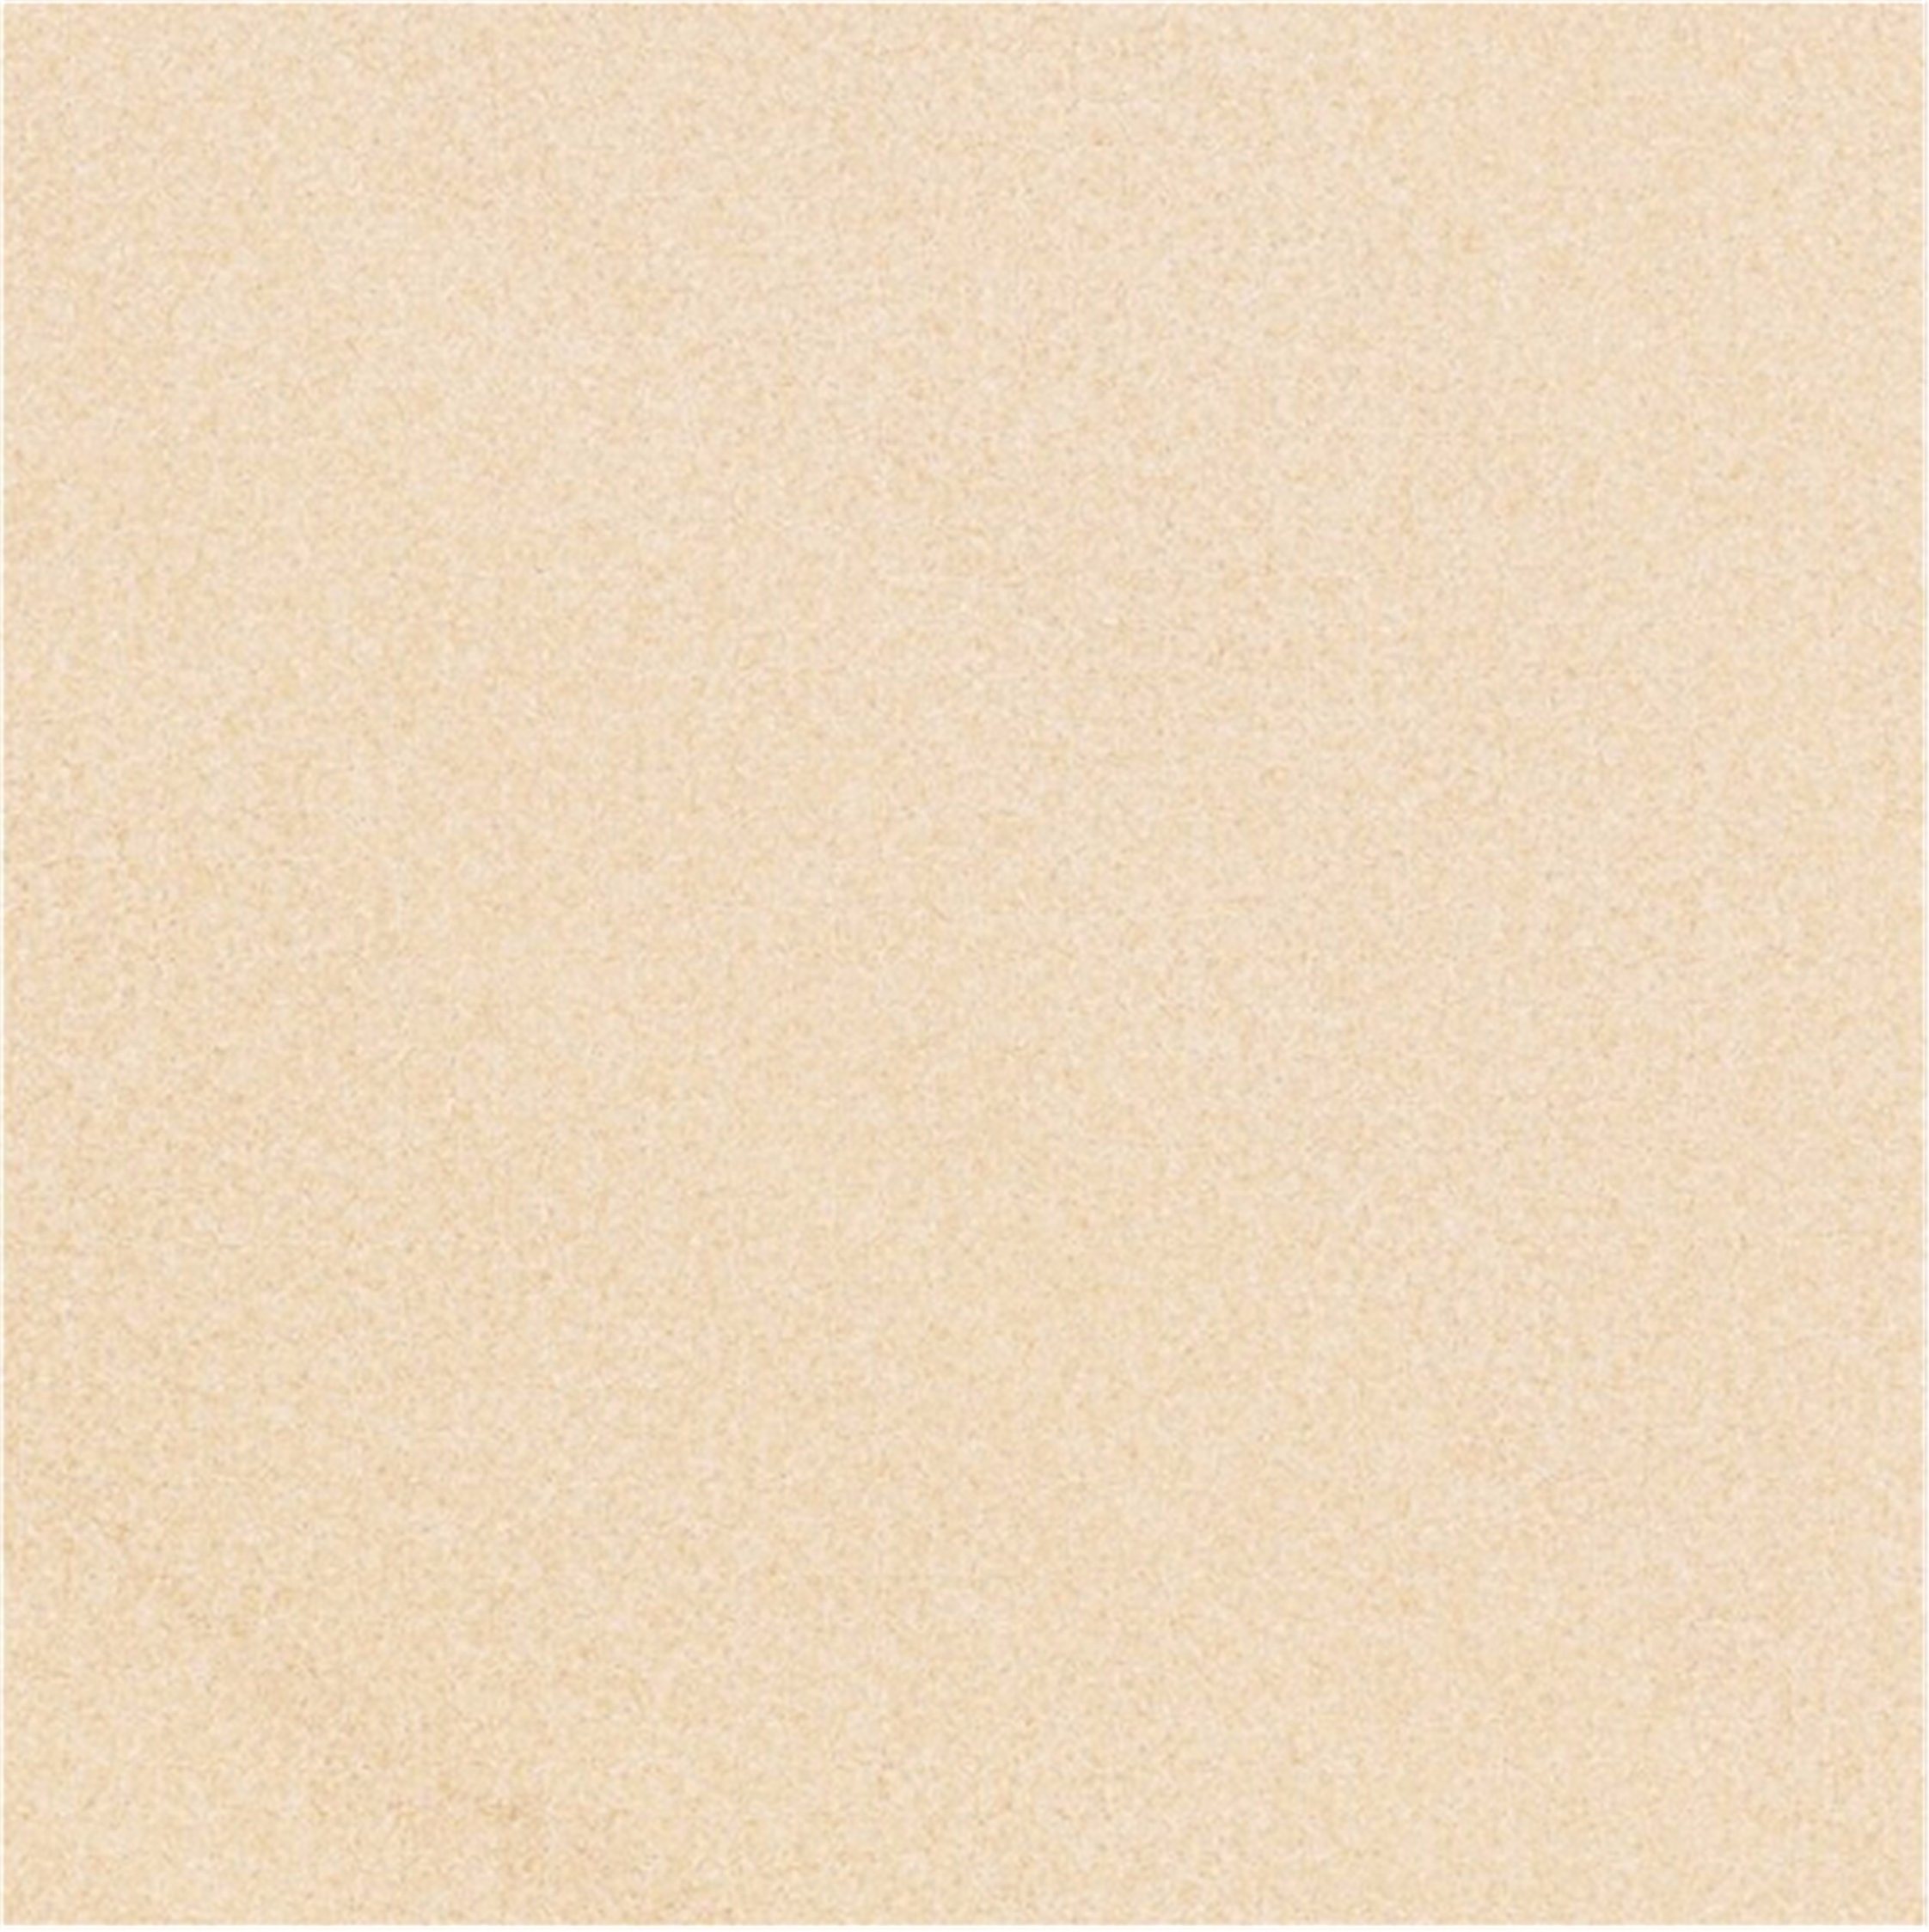 Sp6511m Matt/Polished/ Rough Floor Tile Color and Size in Choice